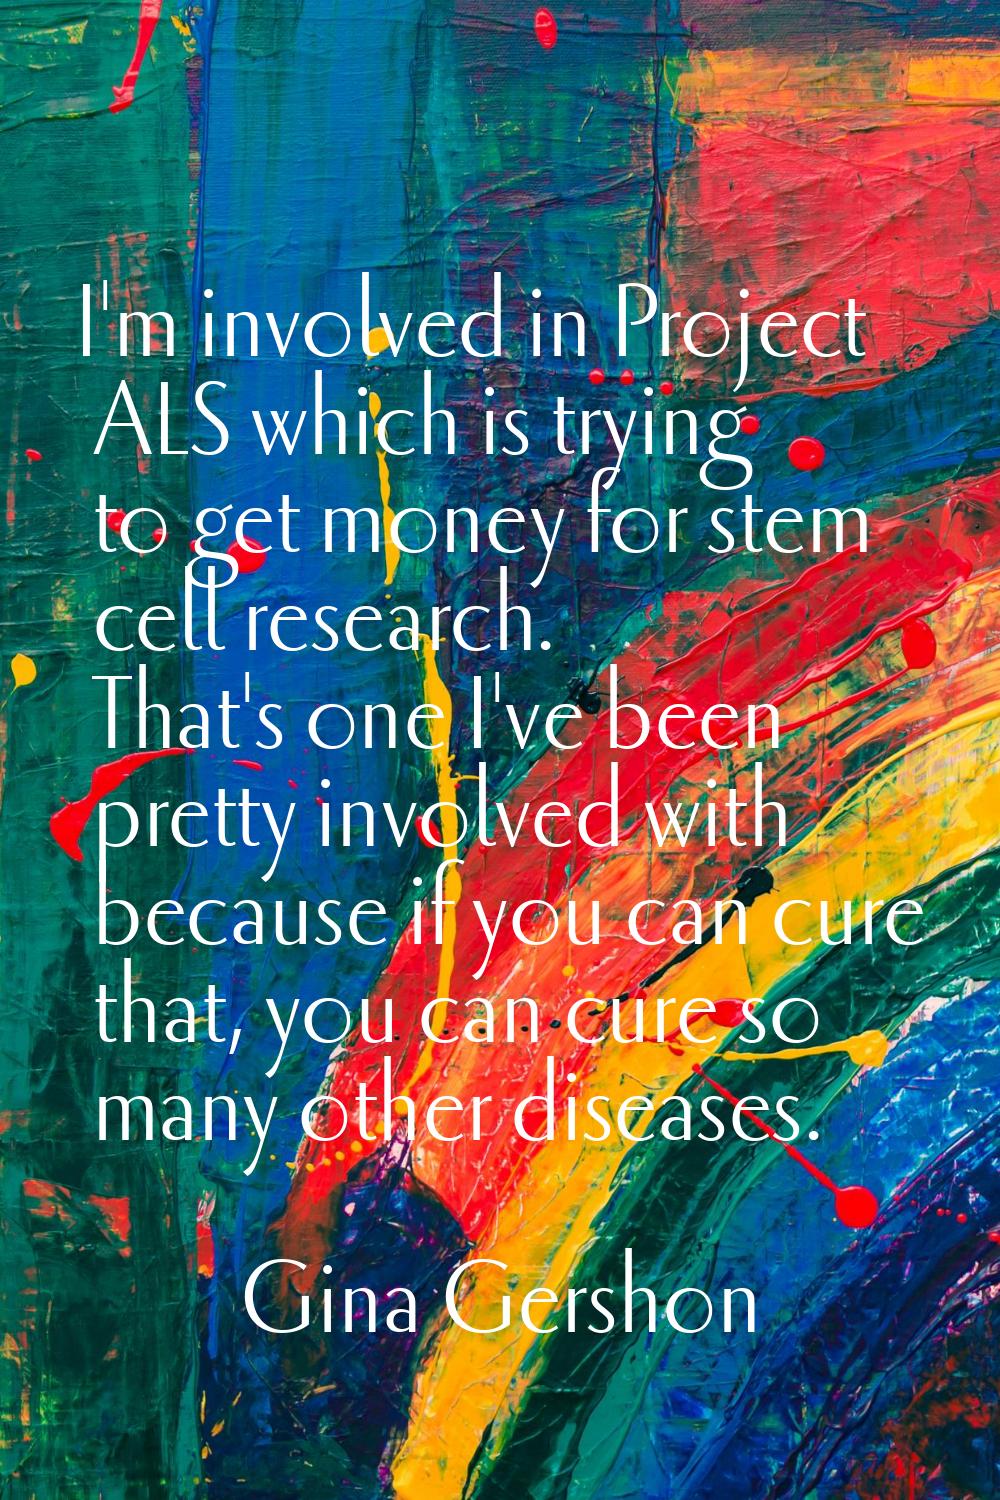 I'm involved in Project ALS which is trying to get money for stem cell research. That's one I've be